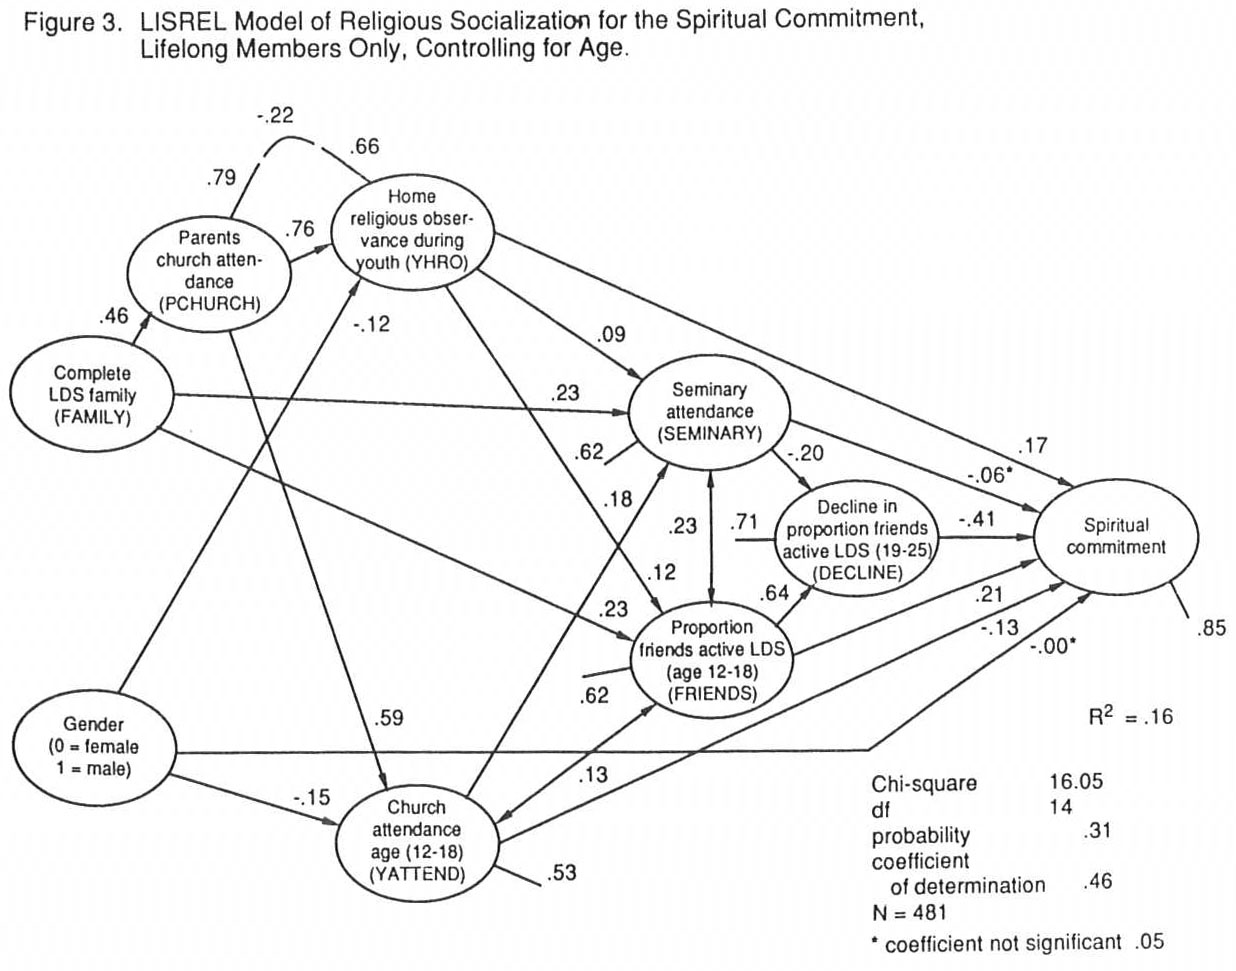 Model of Religious Socialization for Spiritual Commitment Lifelong Members , Controlled for Age